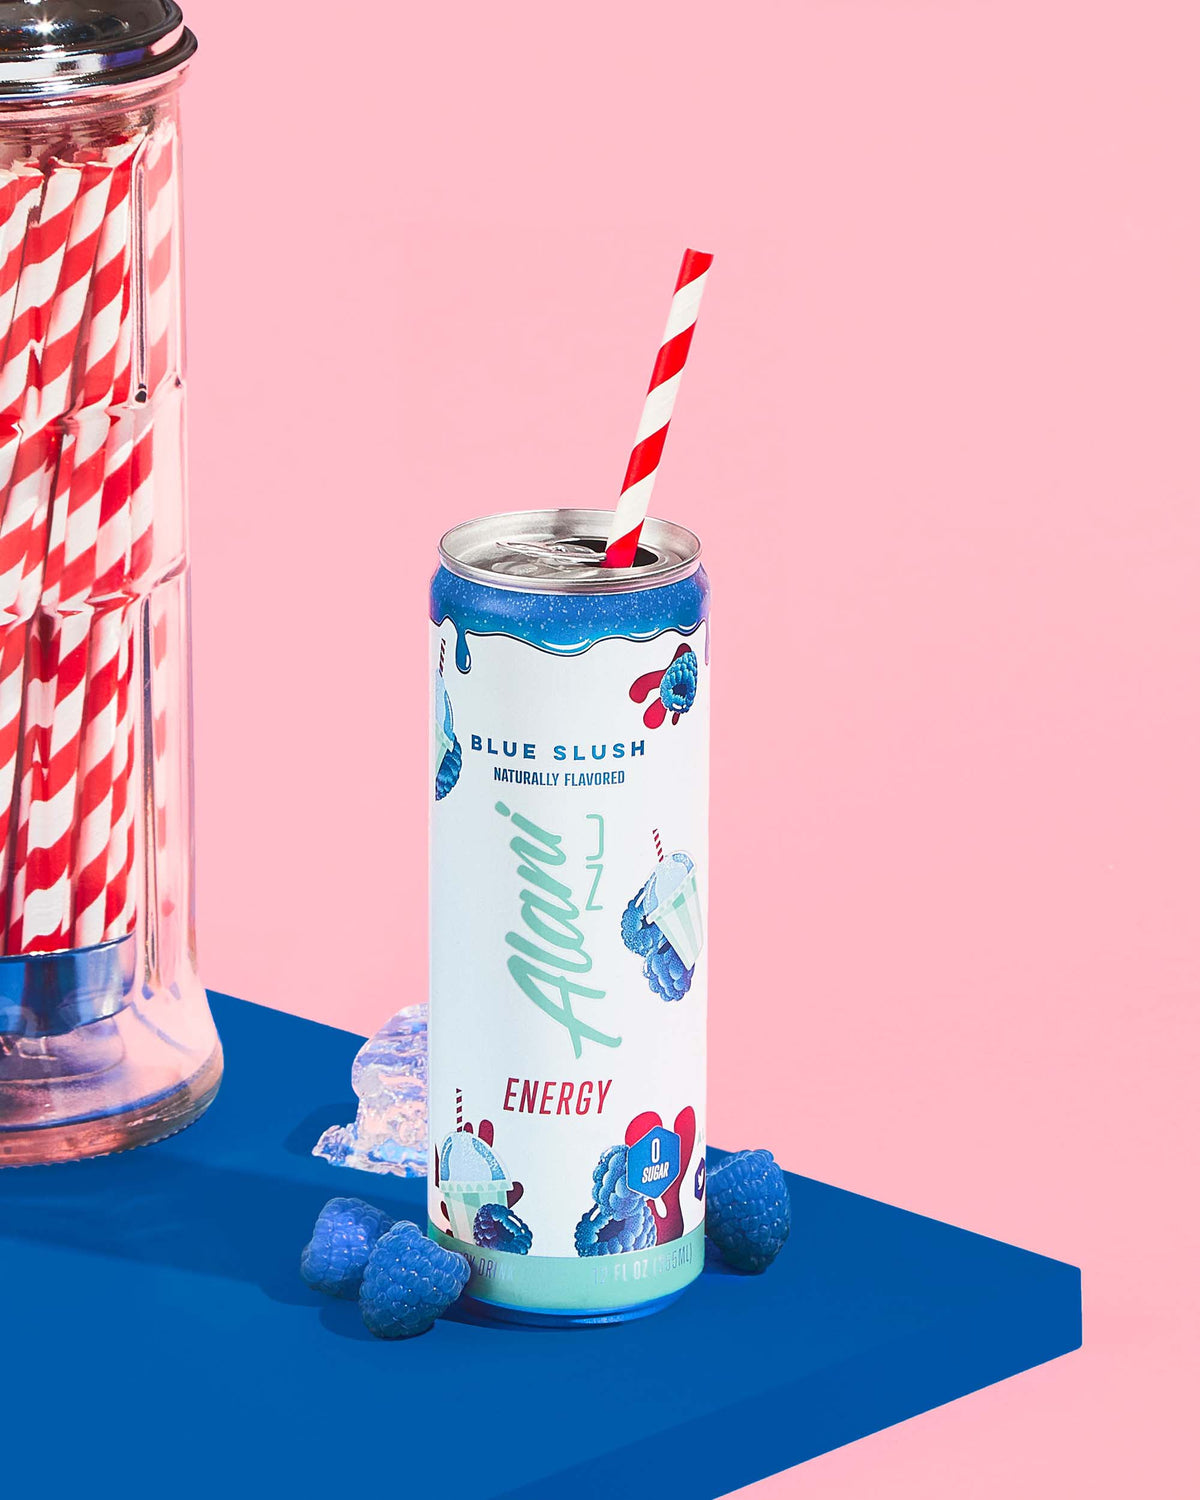 Energy Drink in Blue Slush flavor next to a pile of straws.